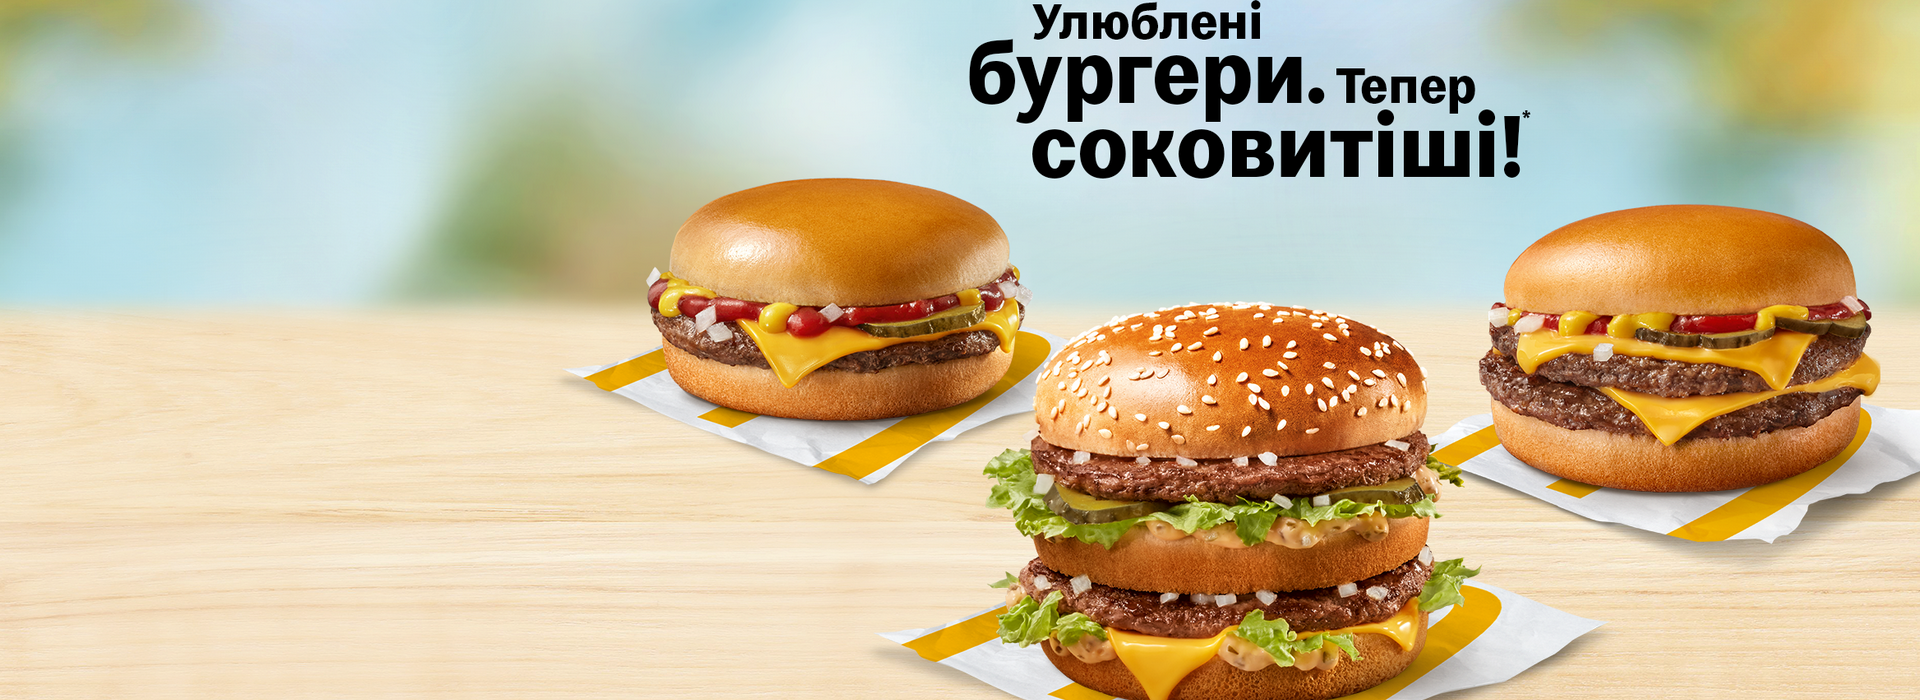 McDonald’s in Ukraine Has Updated the Method of Preparing Big Mac, Cheeseburger and Double Cheeseburger Burgers. Many Small Changes Have Been Introduced for the Juiciness of Classic Burgers and a Brighter Taste